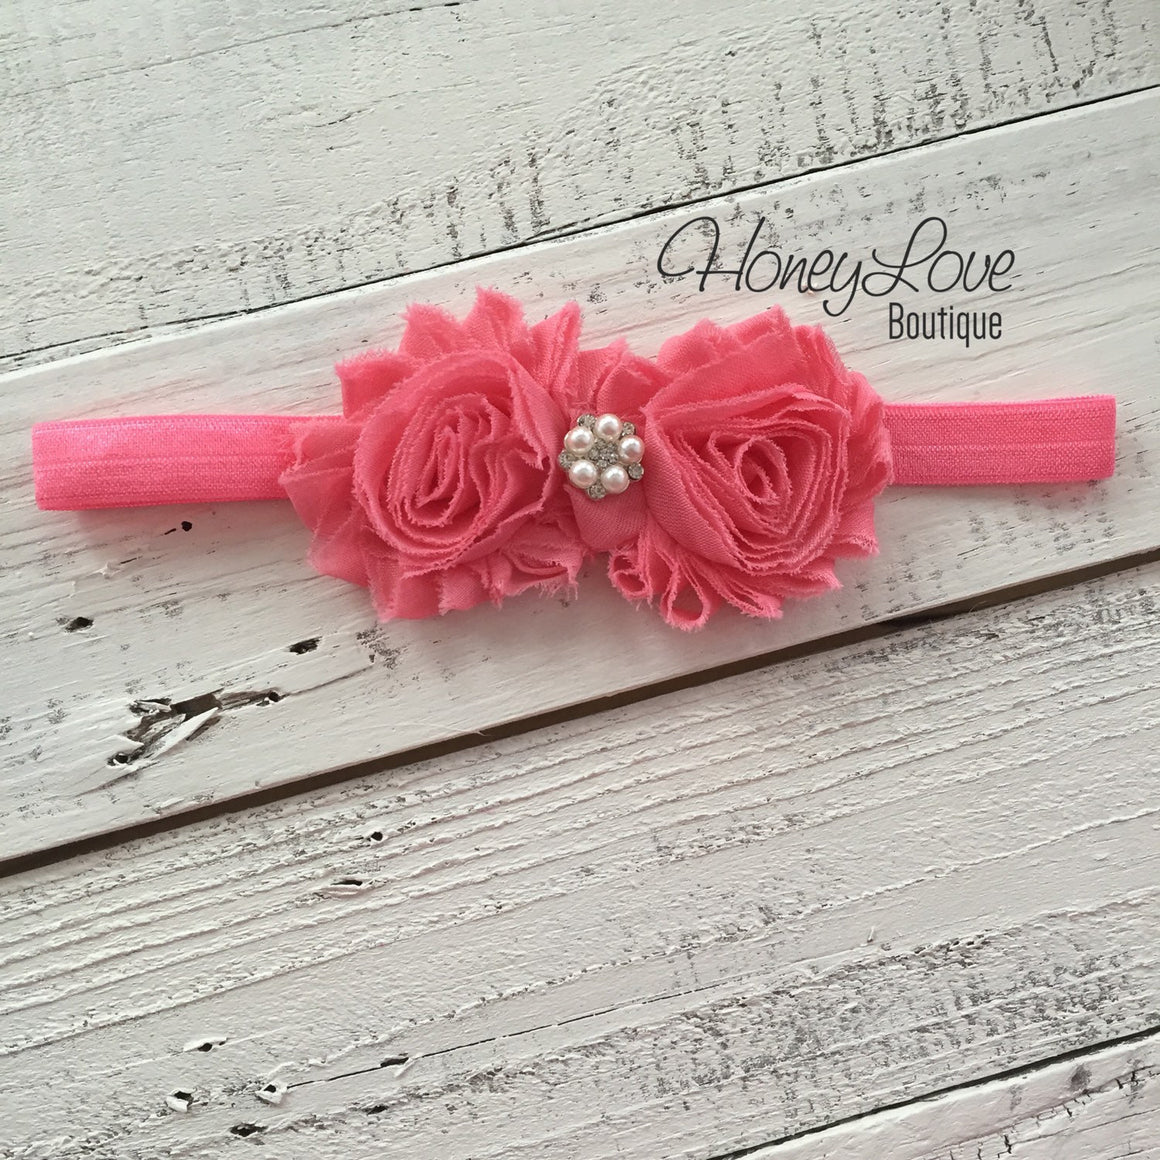 Coral Pink Ruffle Leg Warmers and matching headband - HoneyLoveBoutique